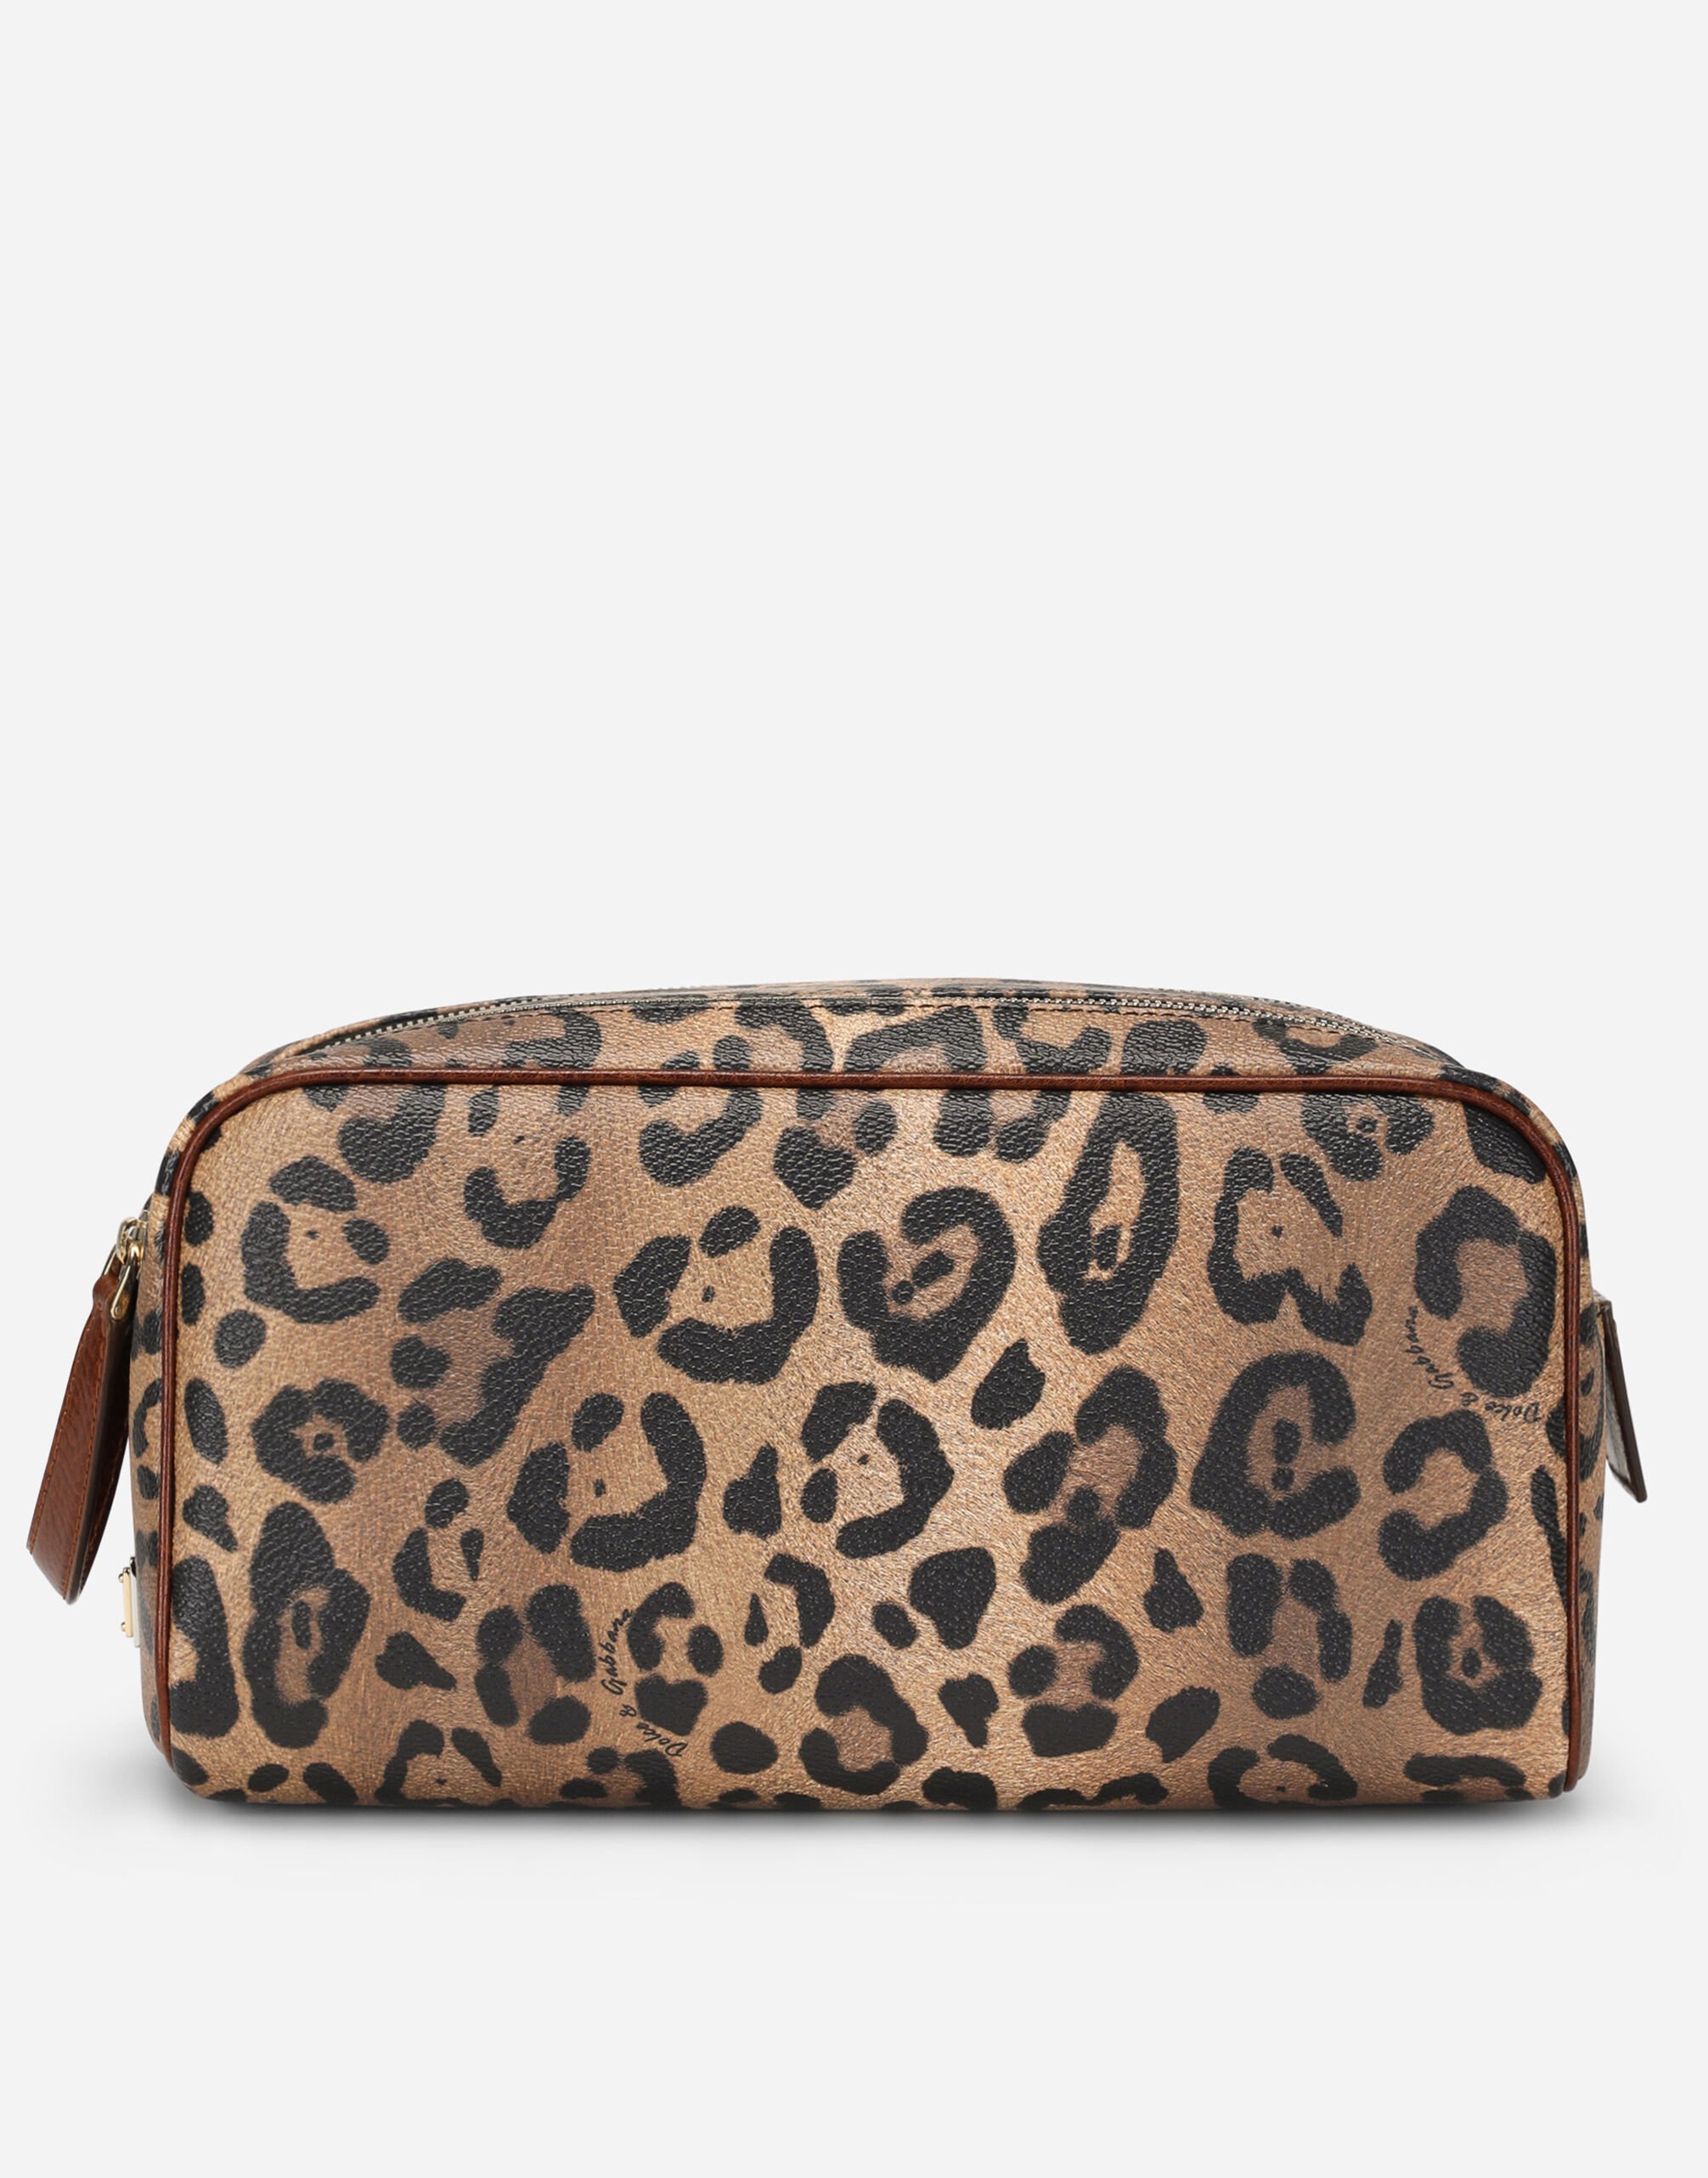 Dolce & Gabbana Leopard-print Crespo toiletry bag with branded plate Multicolor BB6933AW384